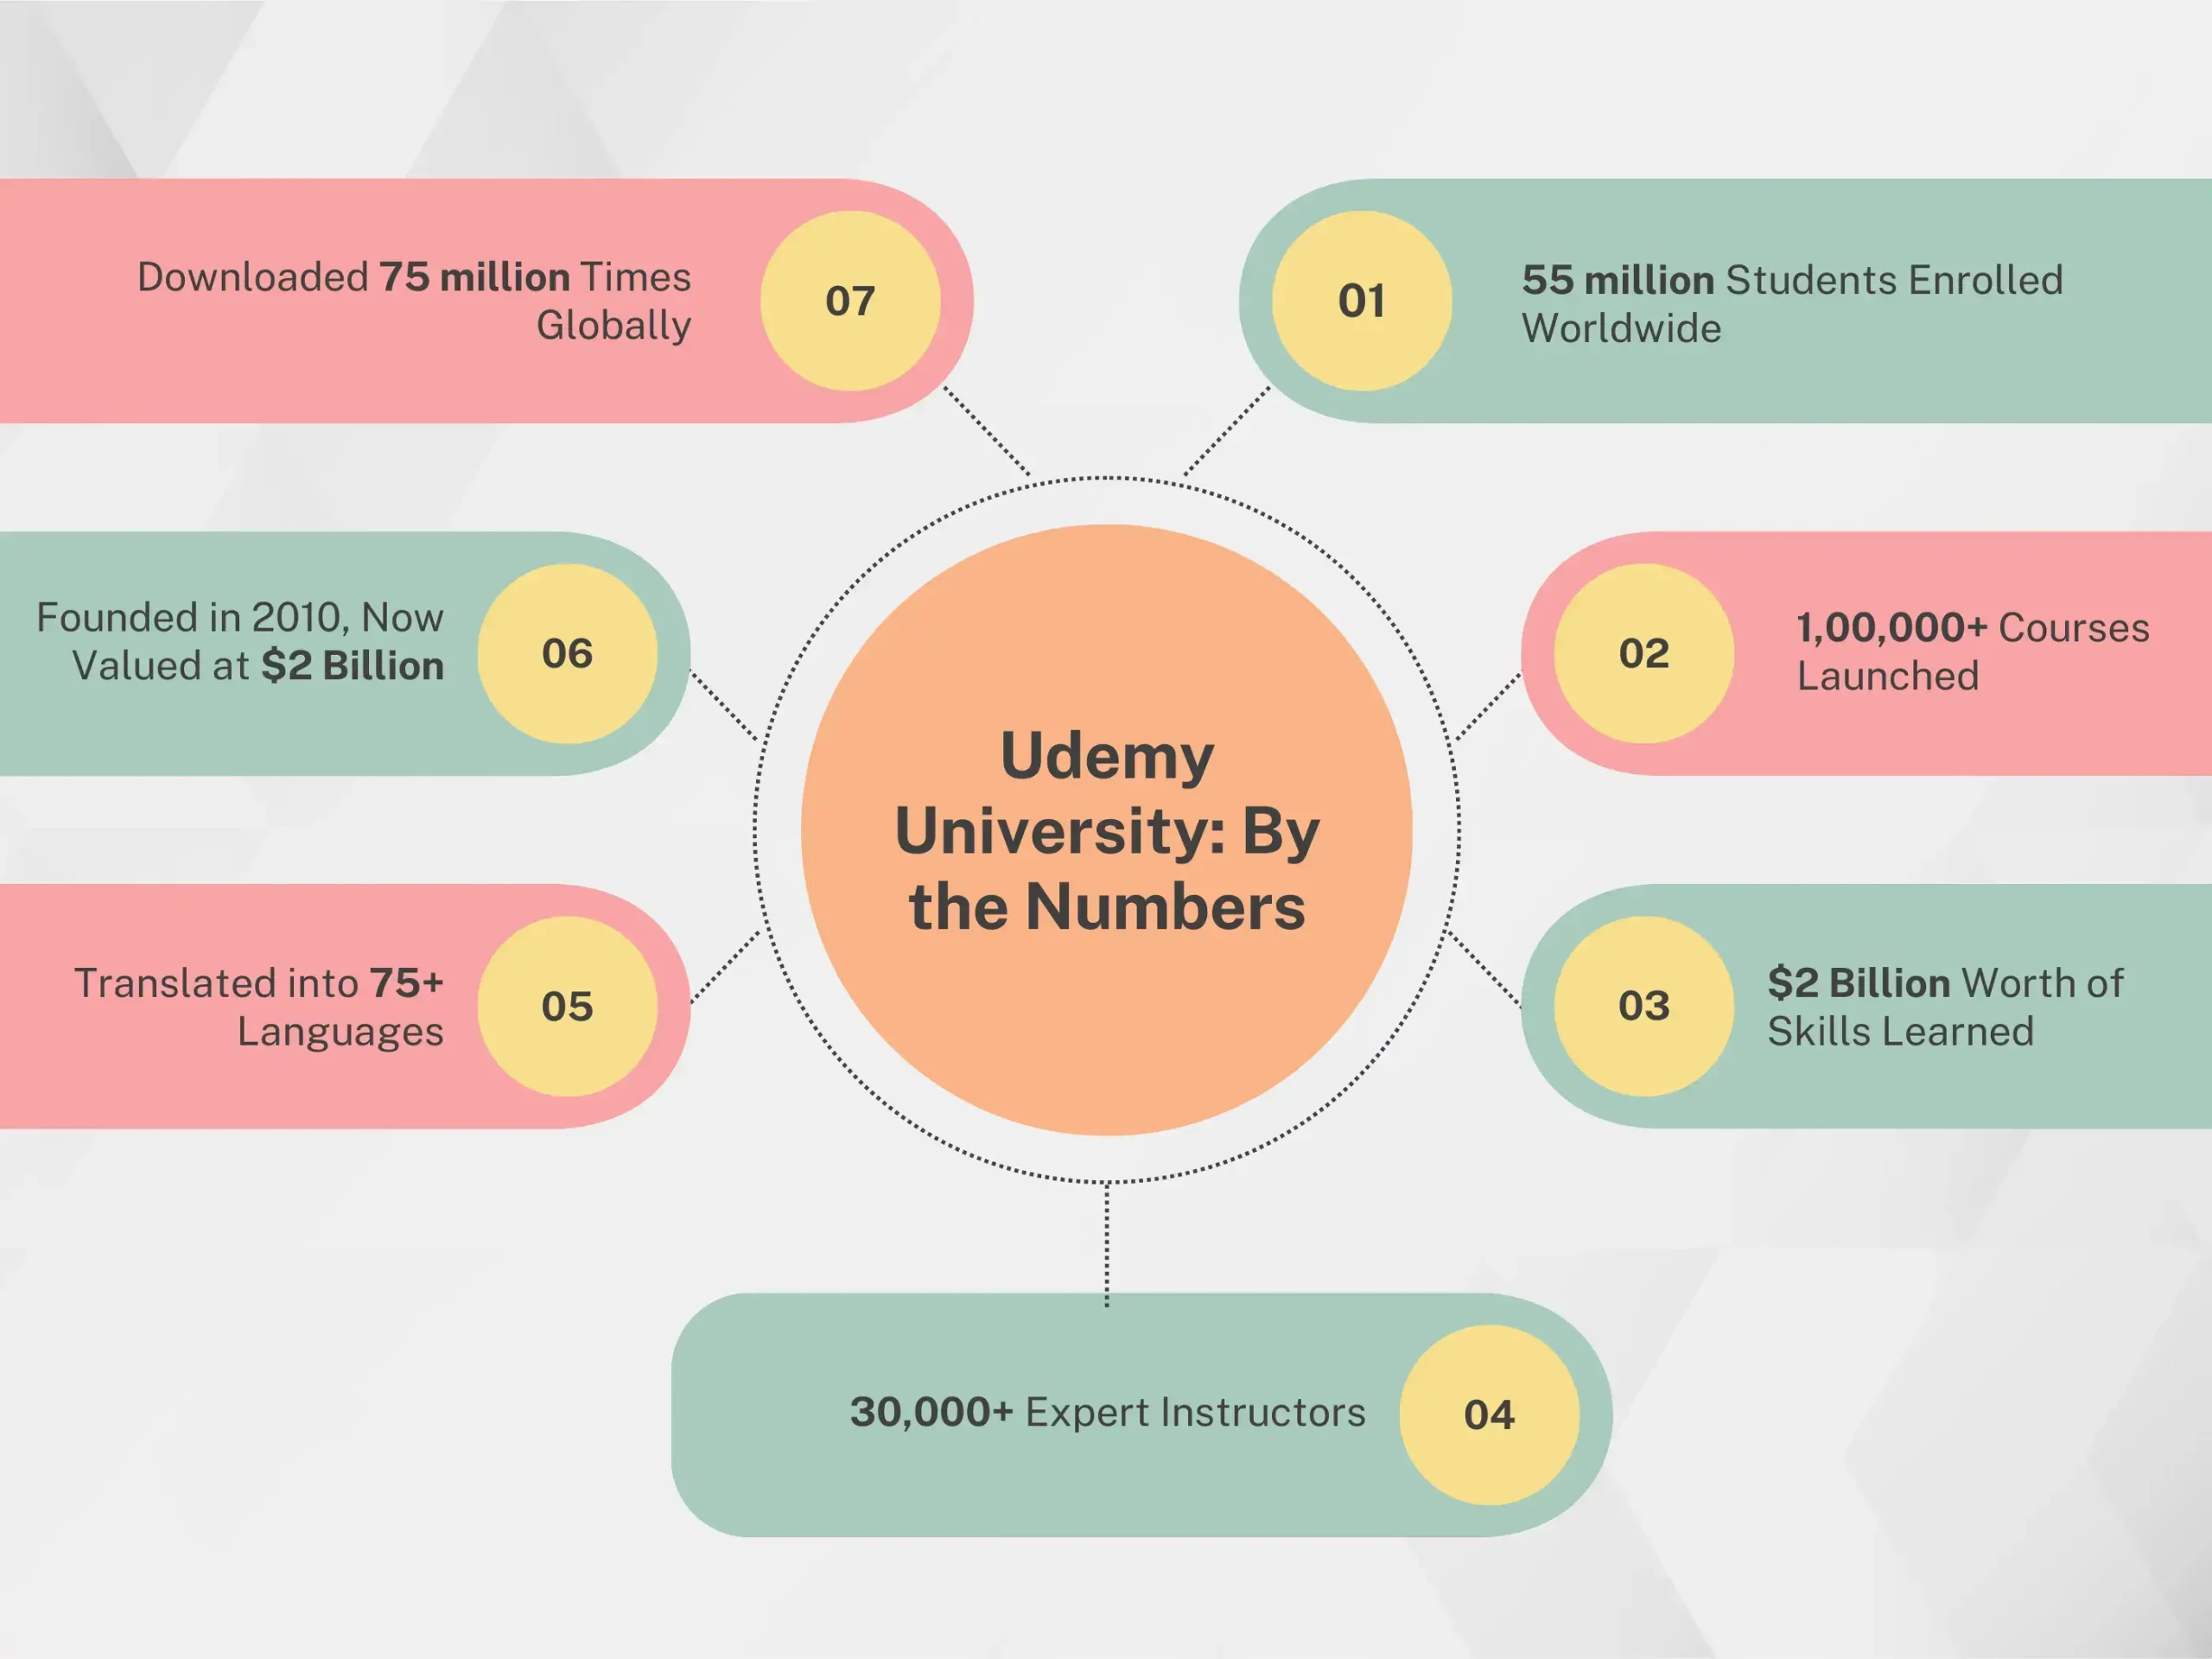 Udemy University: By the Numbers